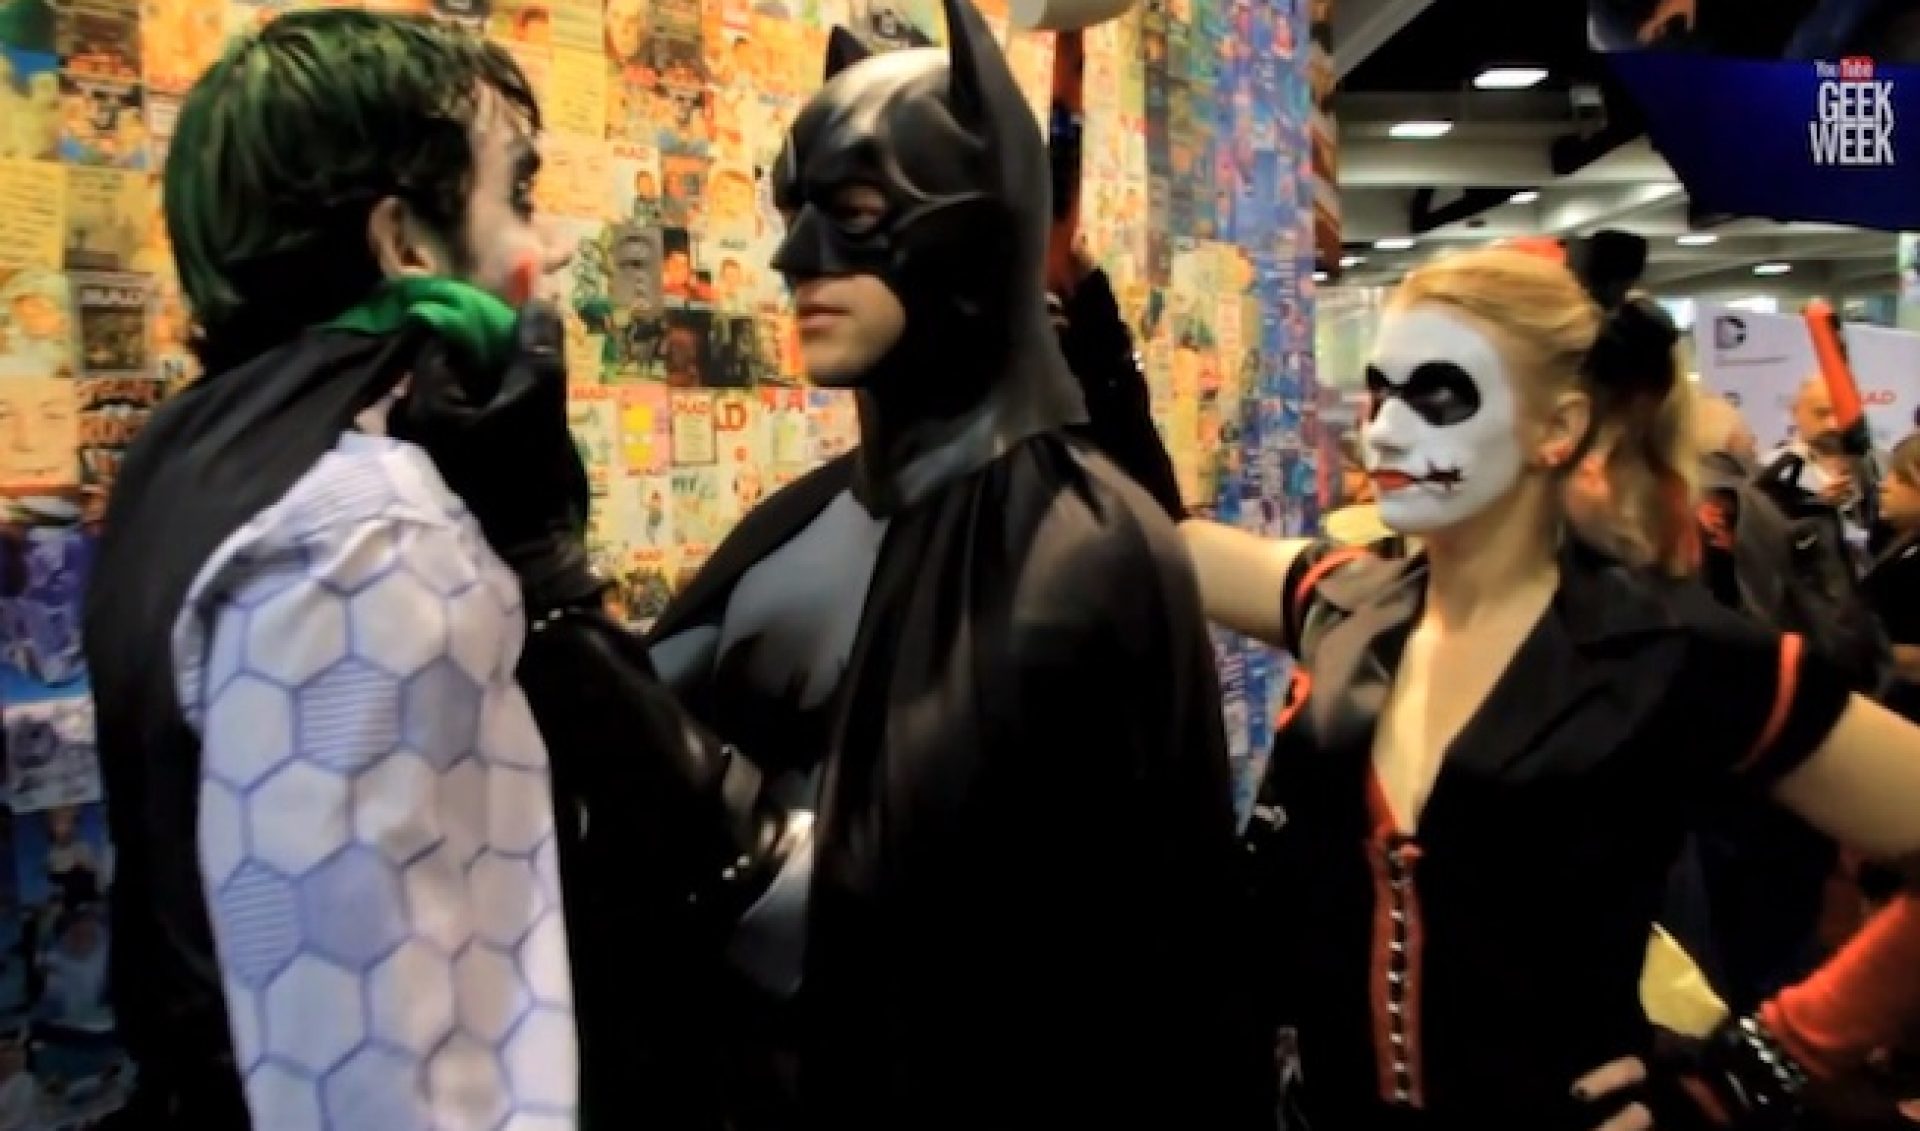 YouTube’s #GeekWeek Gets Its Comic-Con Cosplay On With A Sneaky Zebra